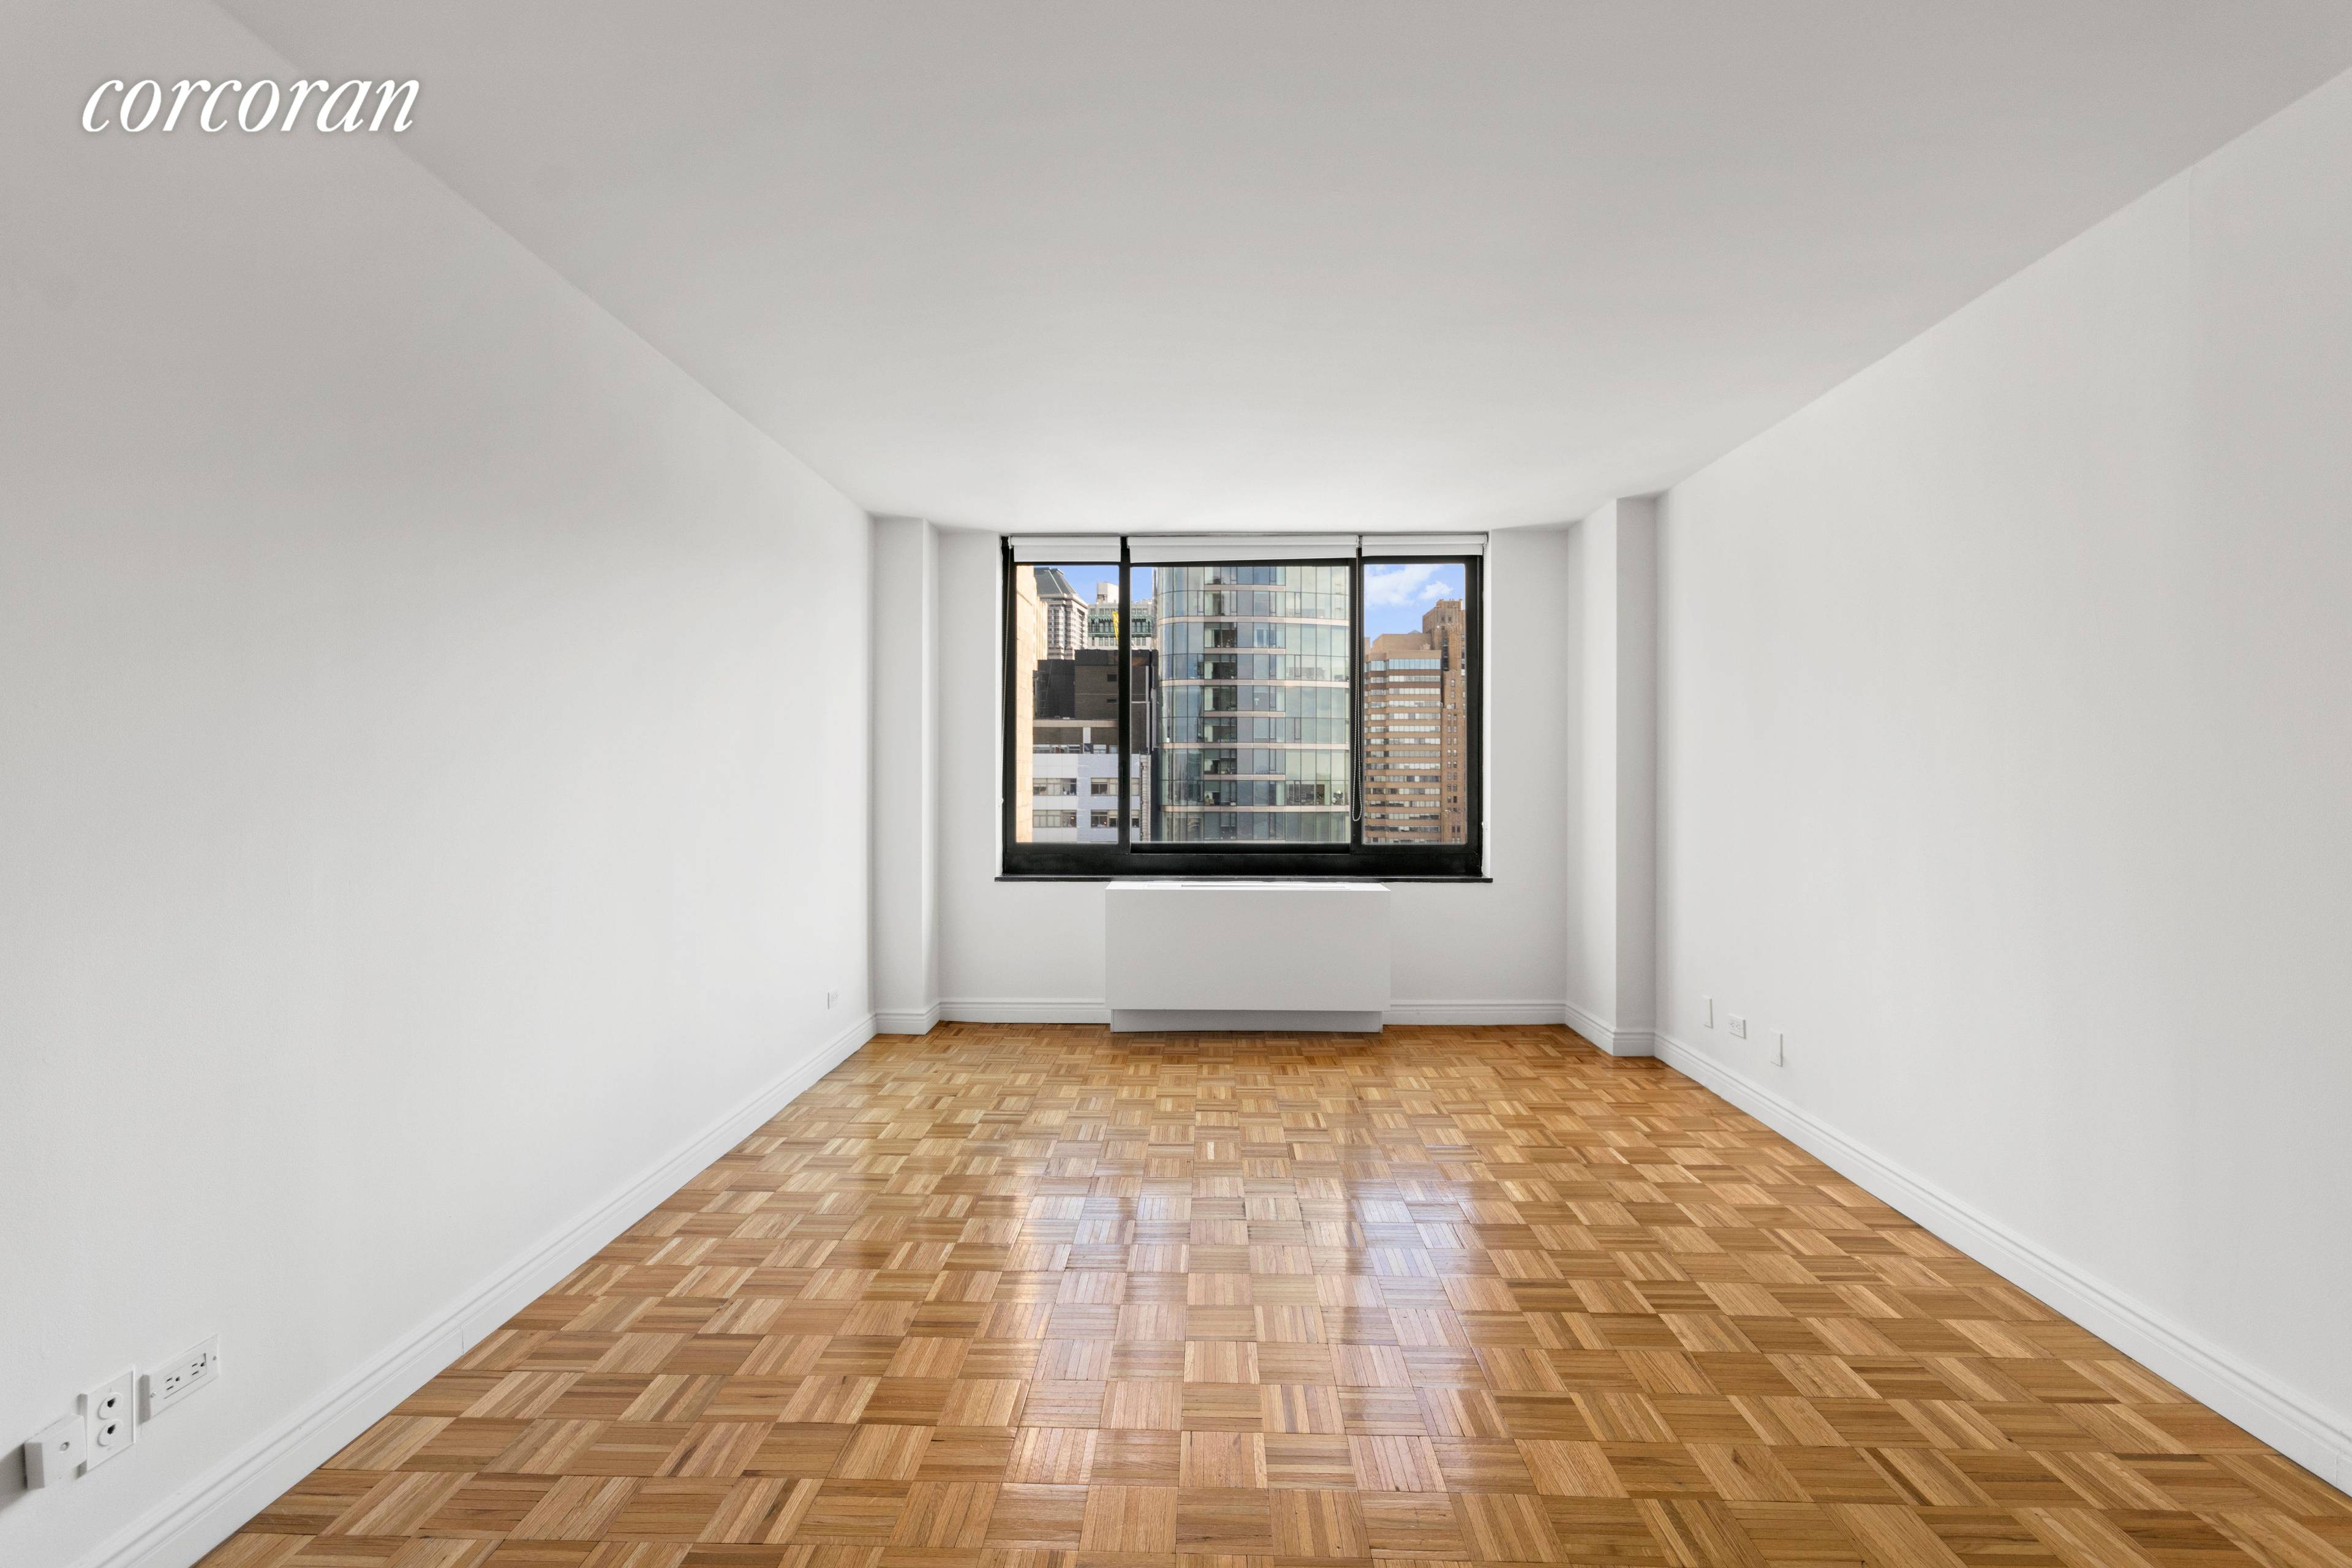 Large 1 bedroom with eastern exposure in South Battery Park.